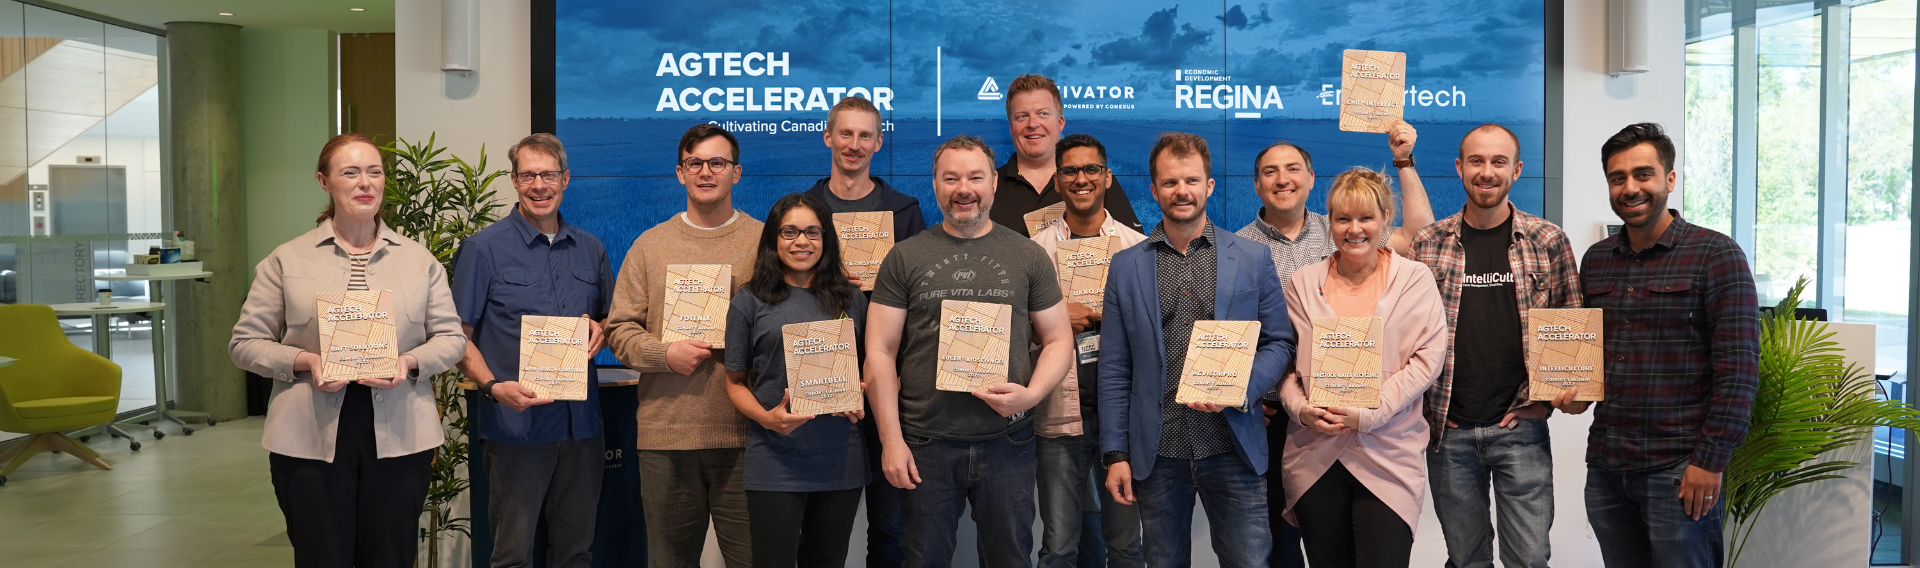 Cohort 1 founders pose and celebrate the completion of AGTECH ACCELERATOR programming